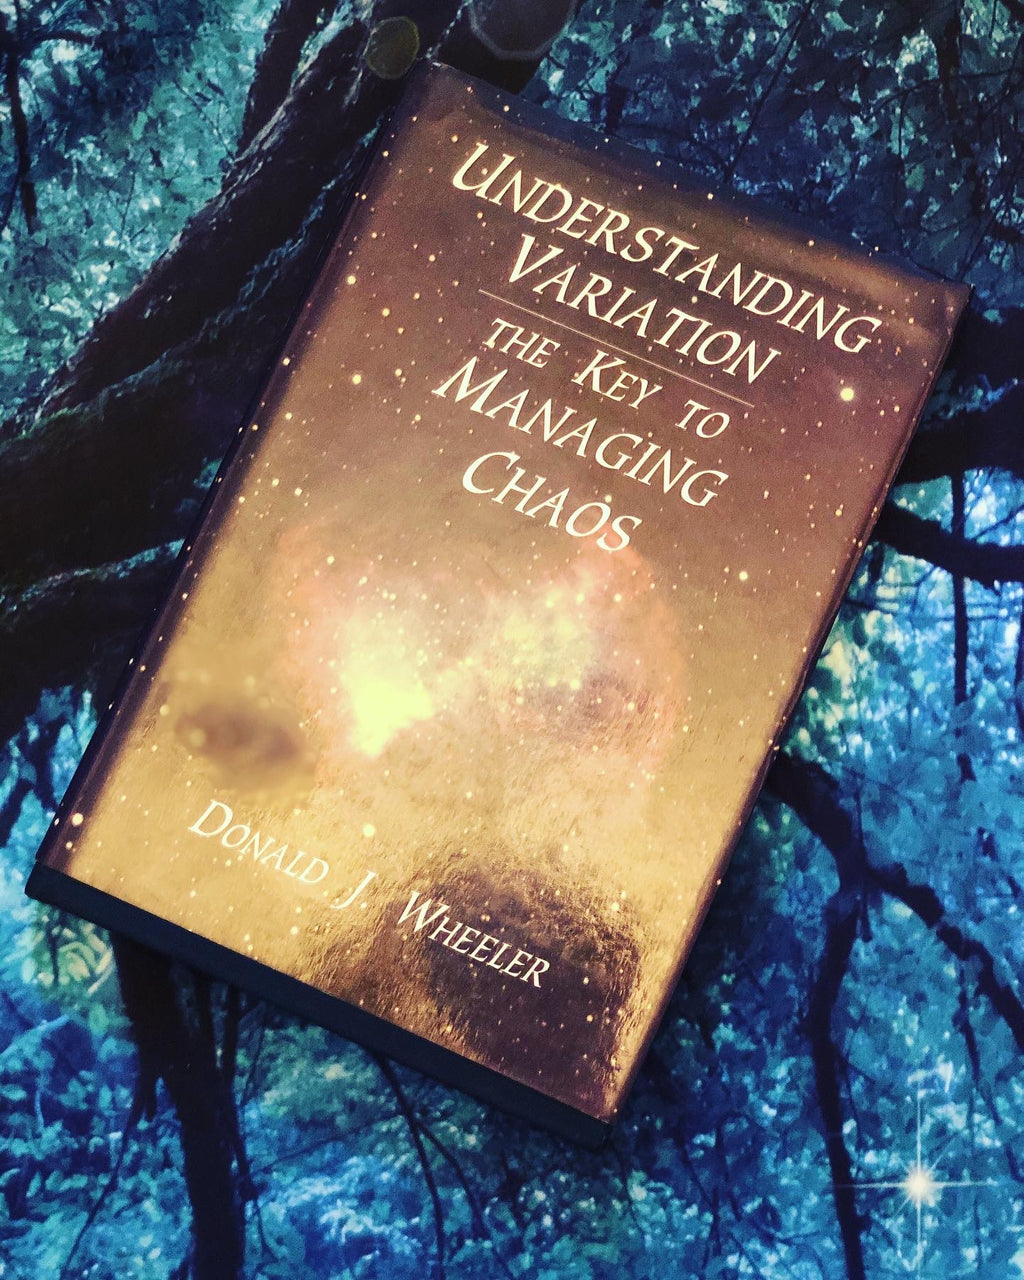 Understanding Variation: The key to Managing Chaos- By Donald J. Wheeler